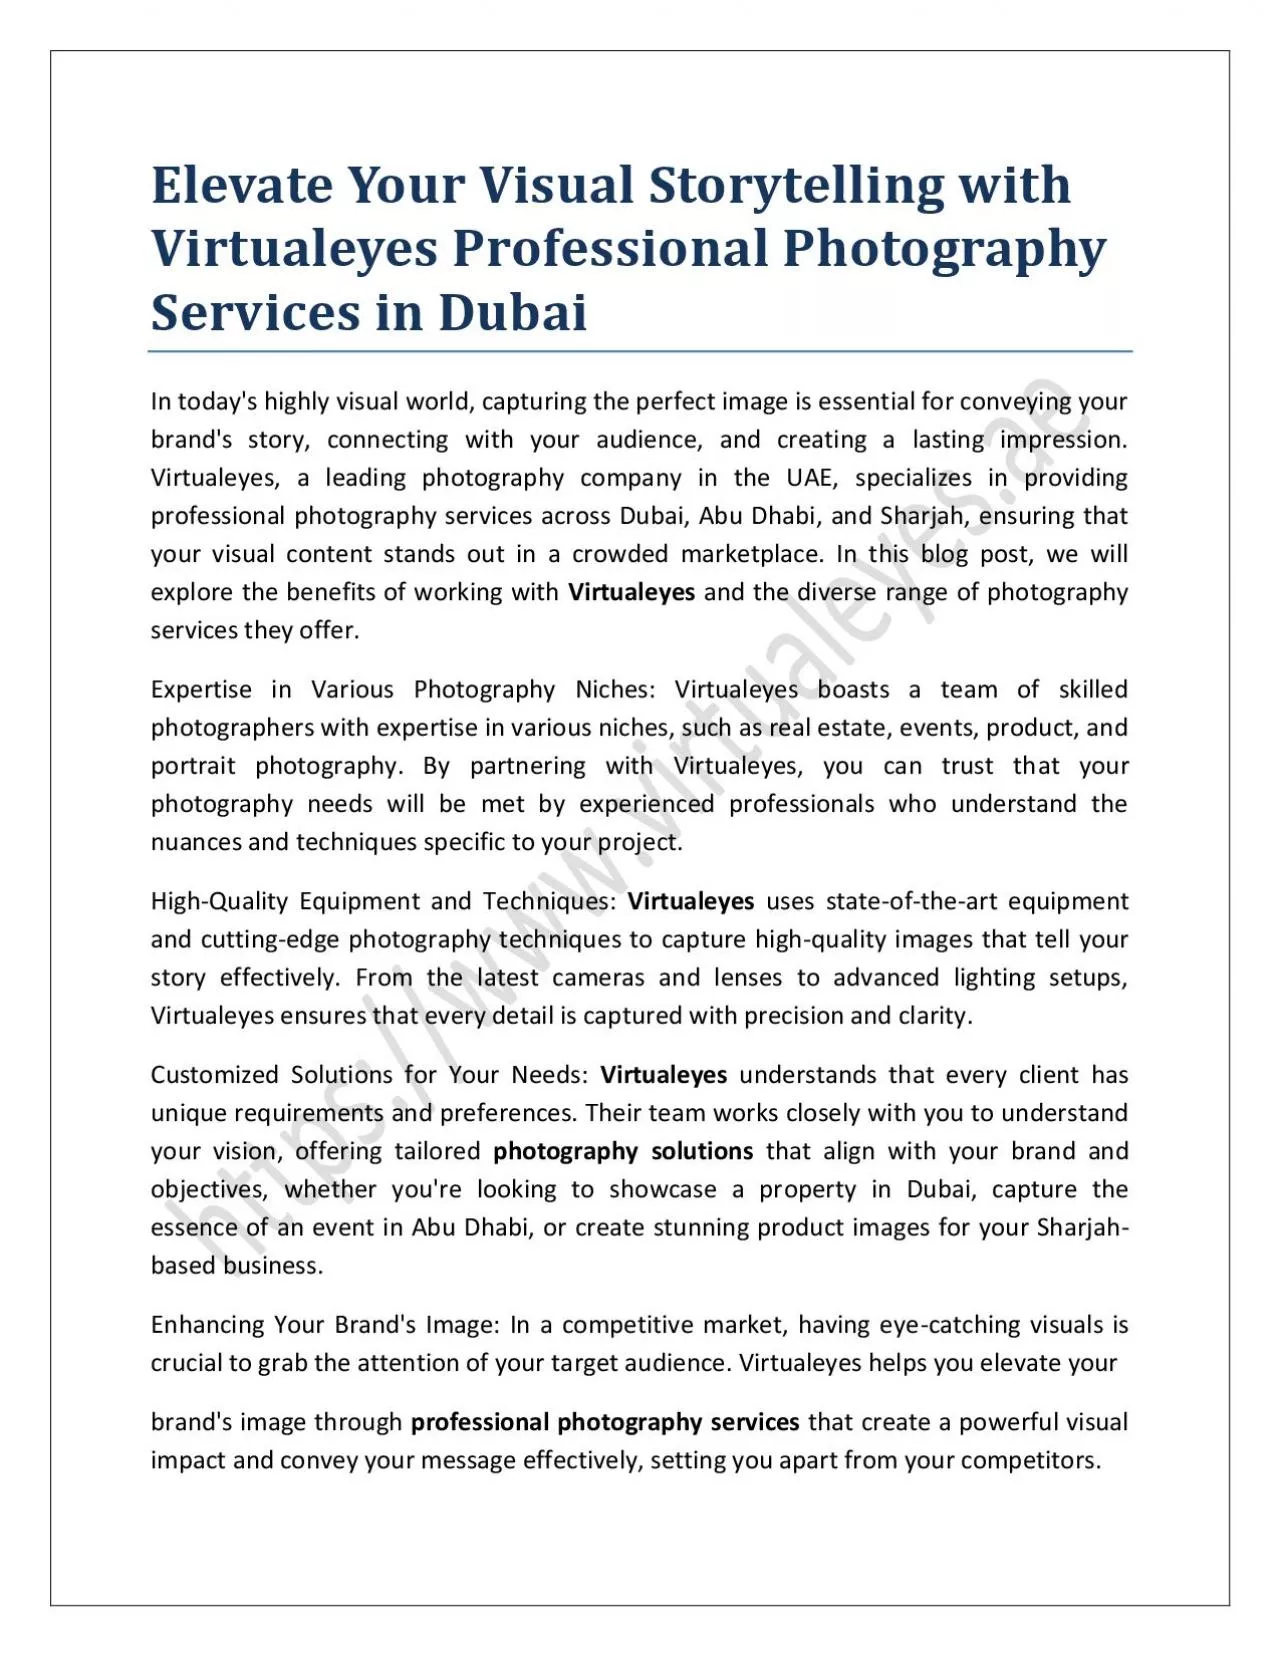 Elevate Your Visual Storytelling with Virtualeyes Professional Photography Services in